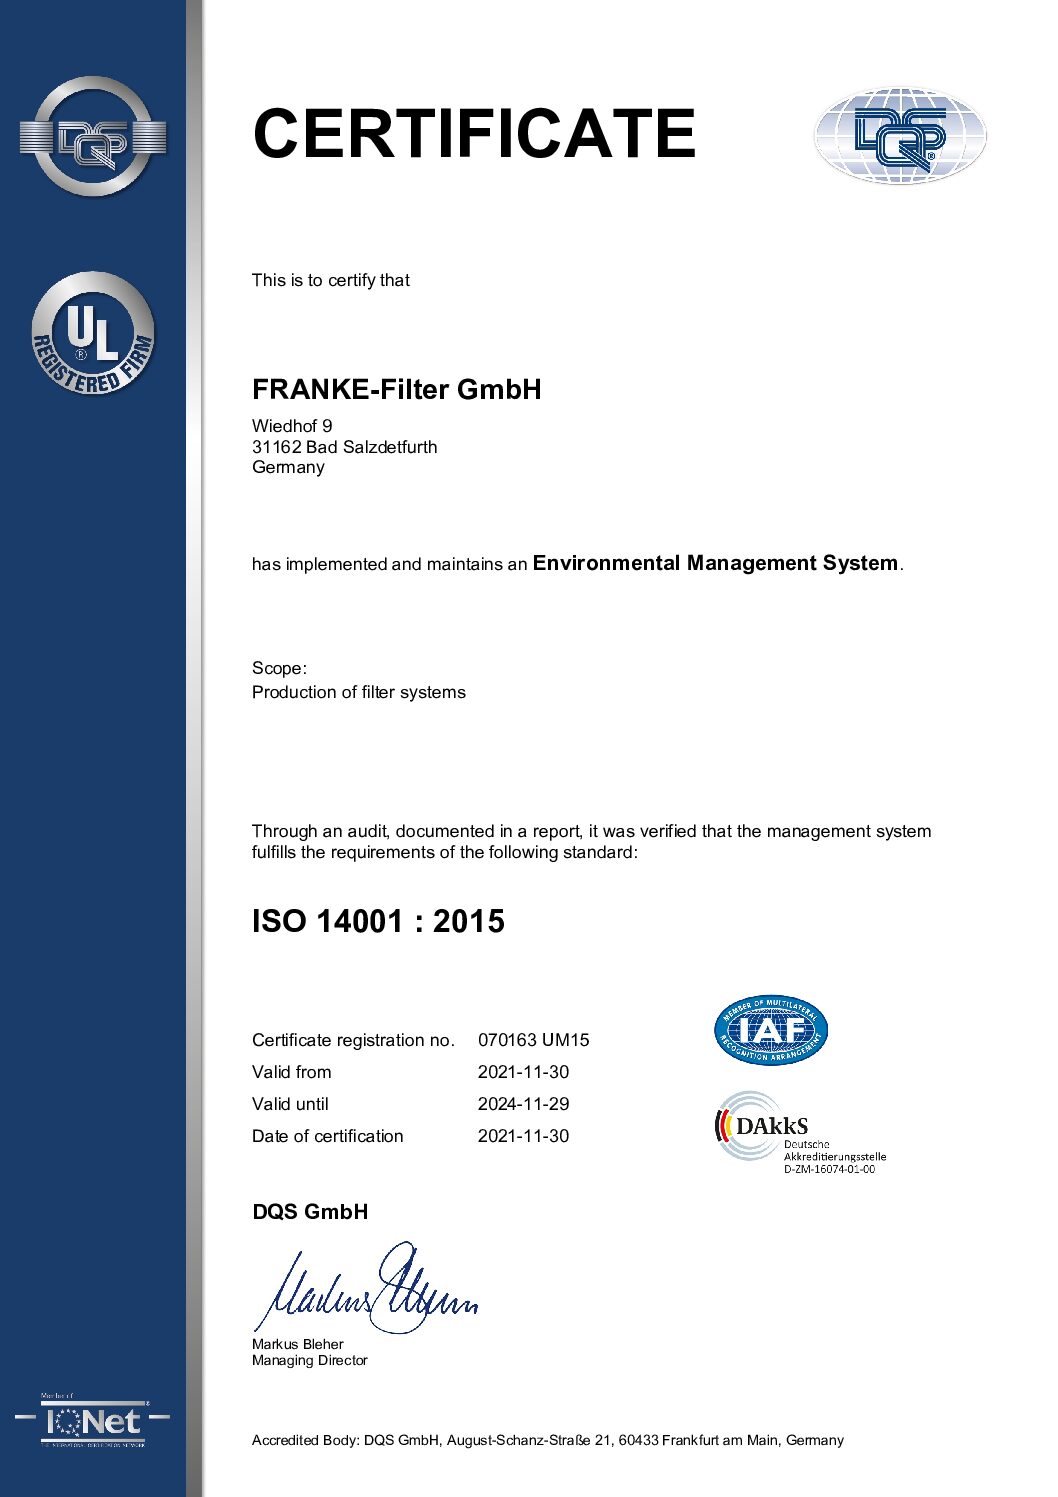 FRANKE-Filter certificate according to ISO 14001 environmental management system